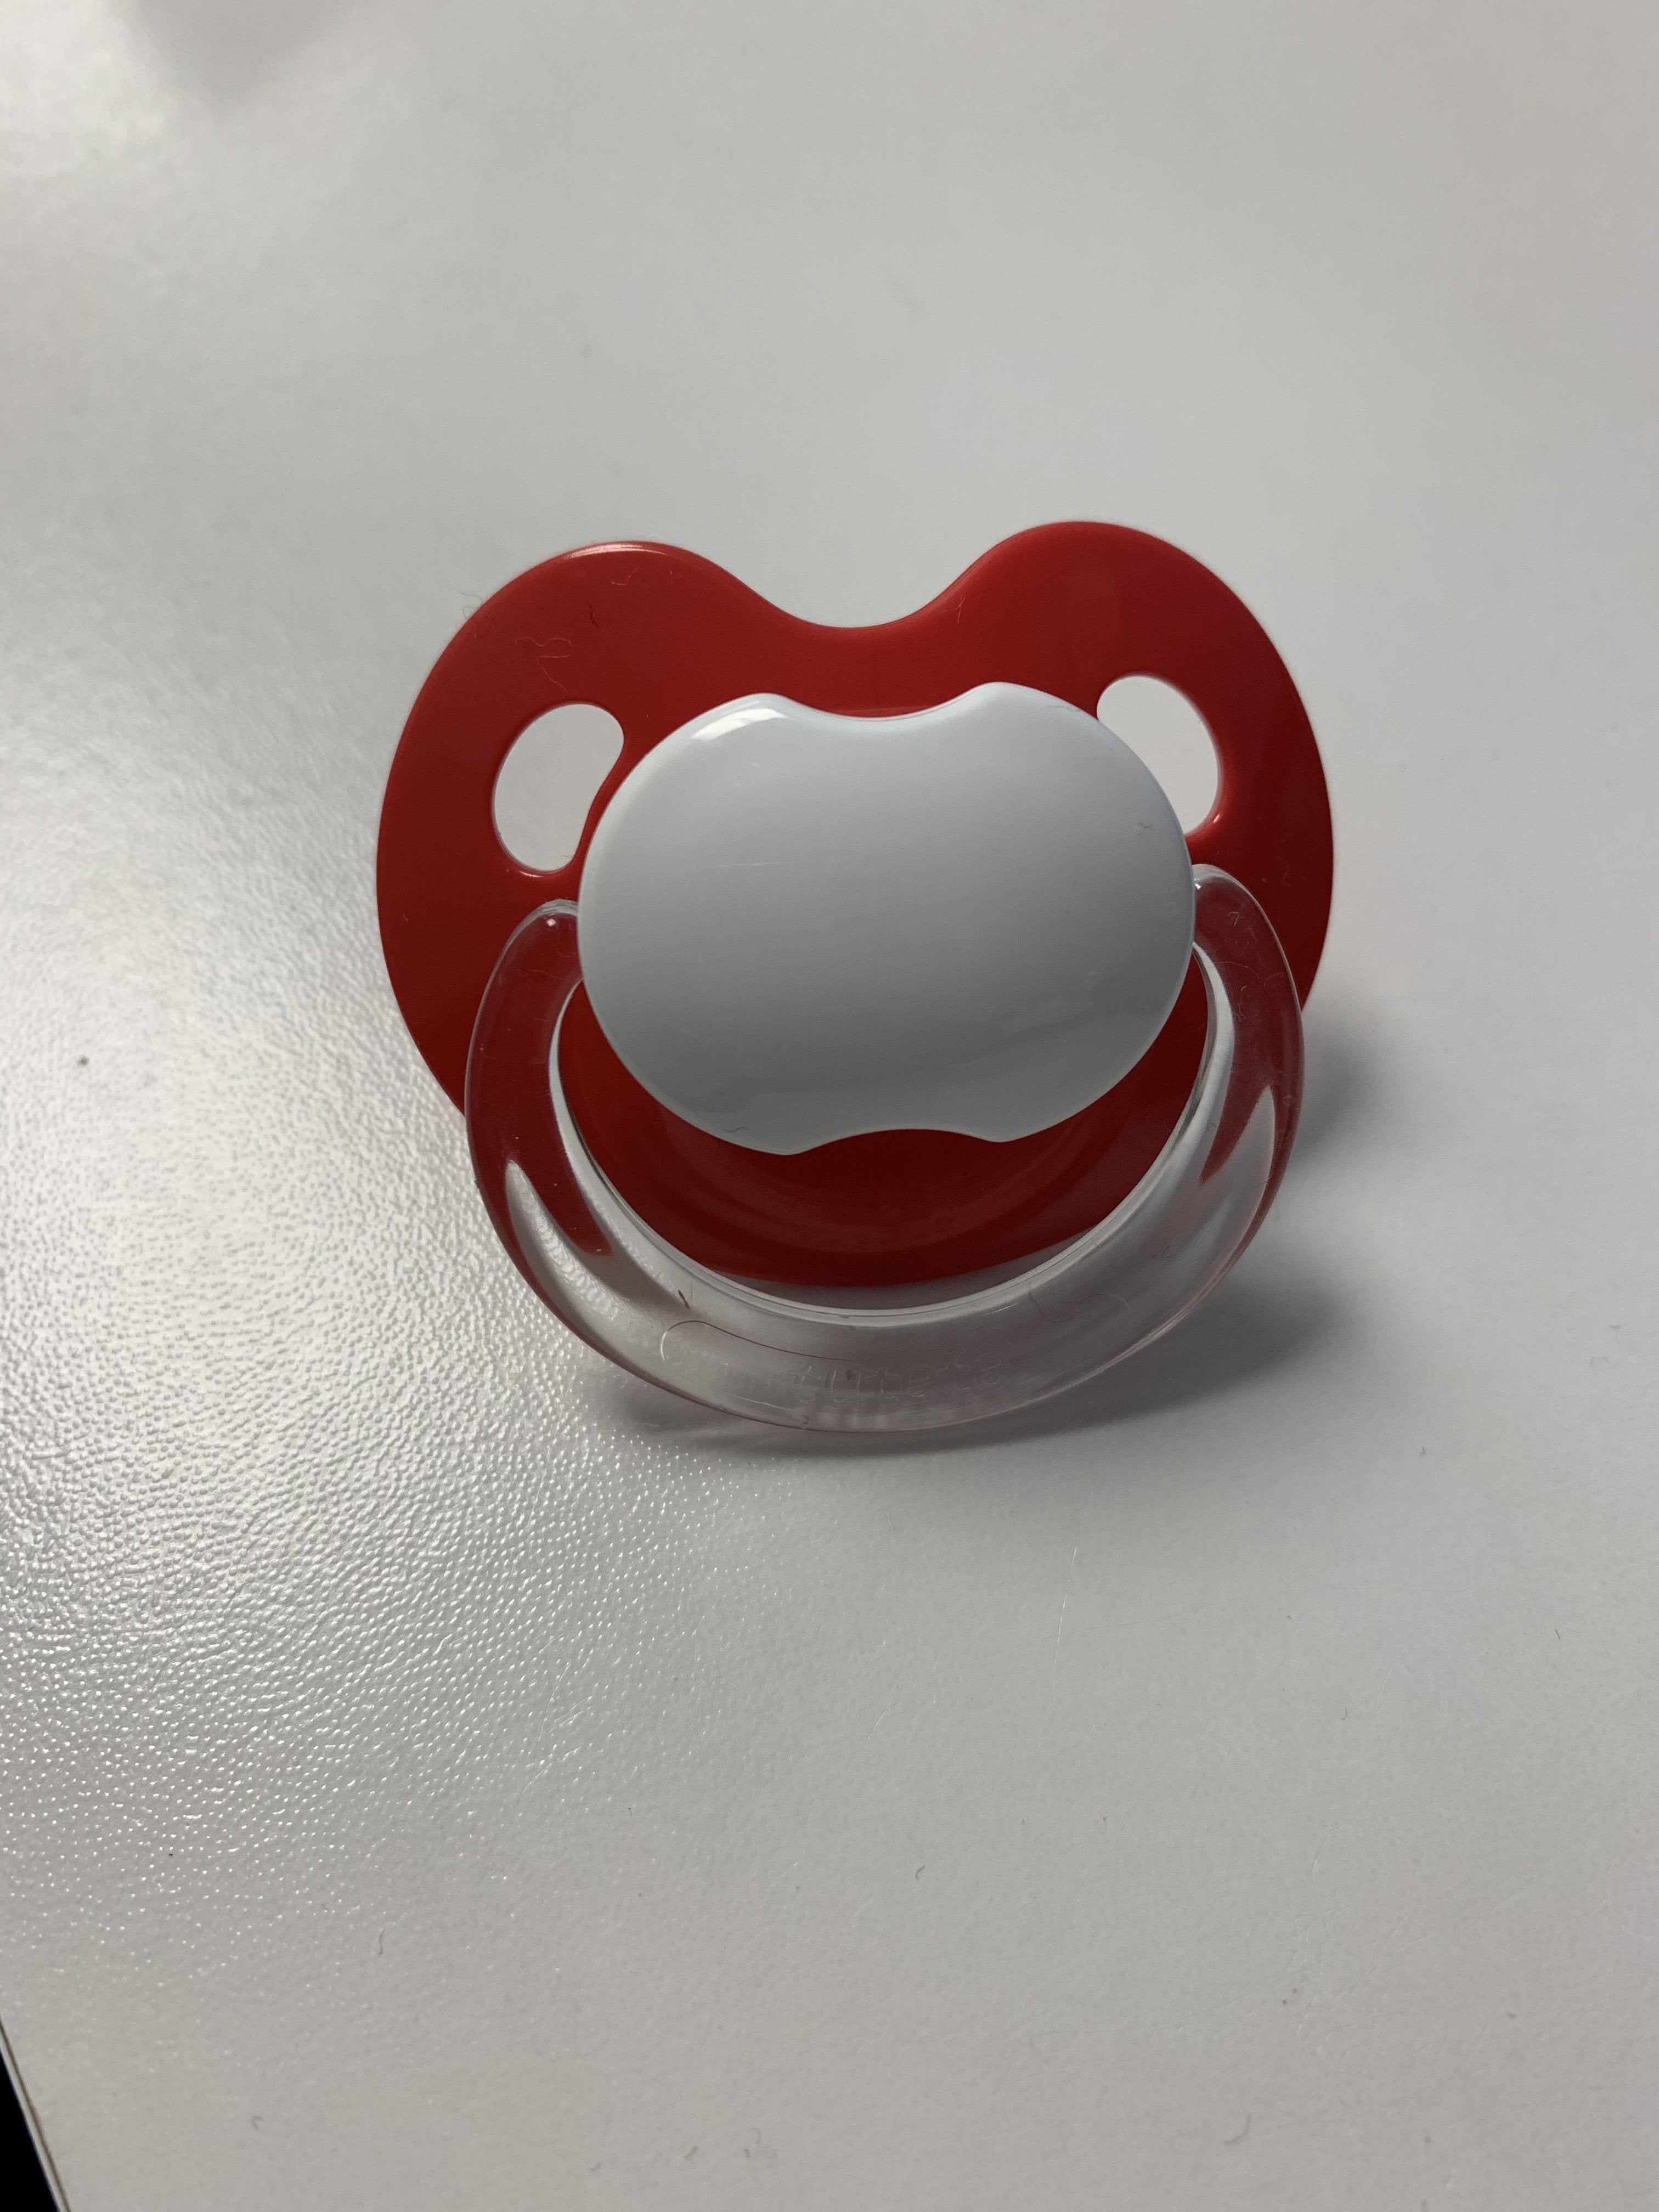 Assymetrical pacifier sale clearance 6+ size